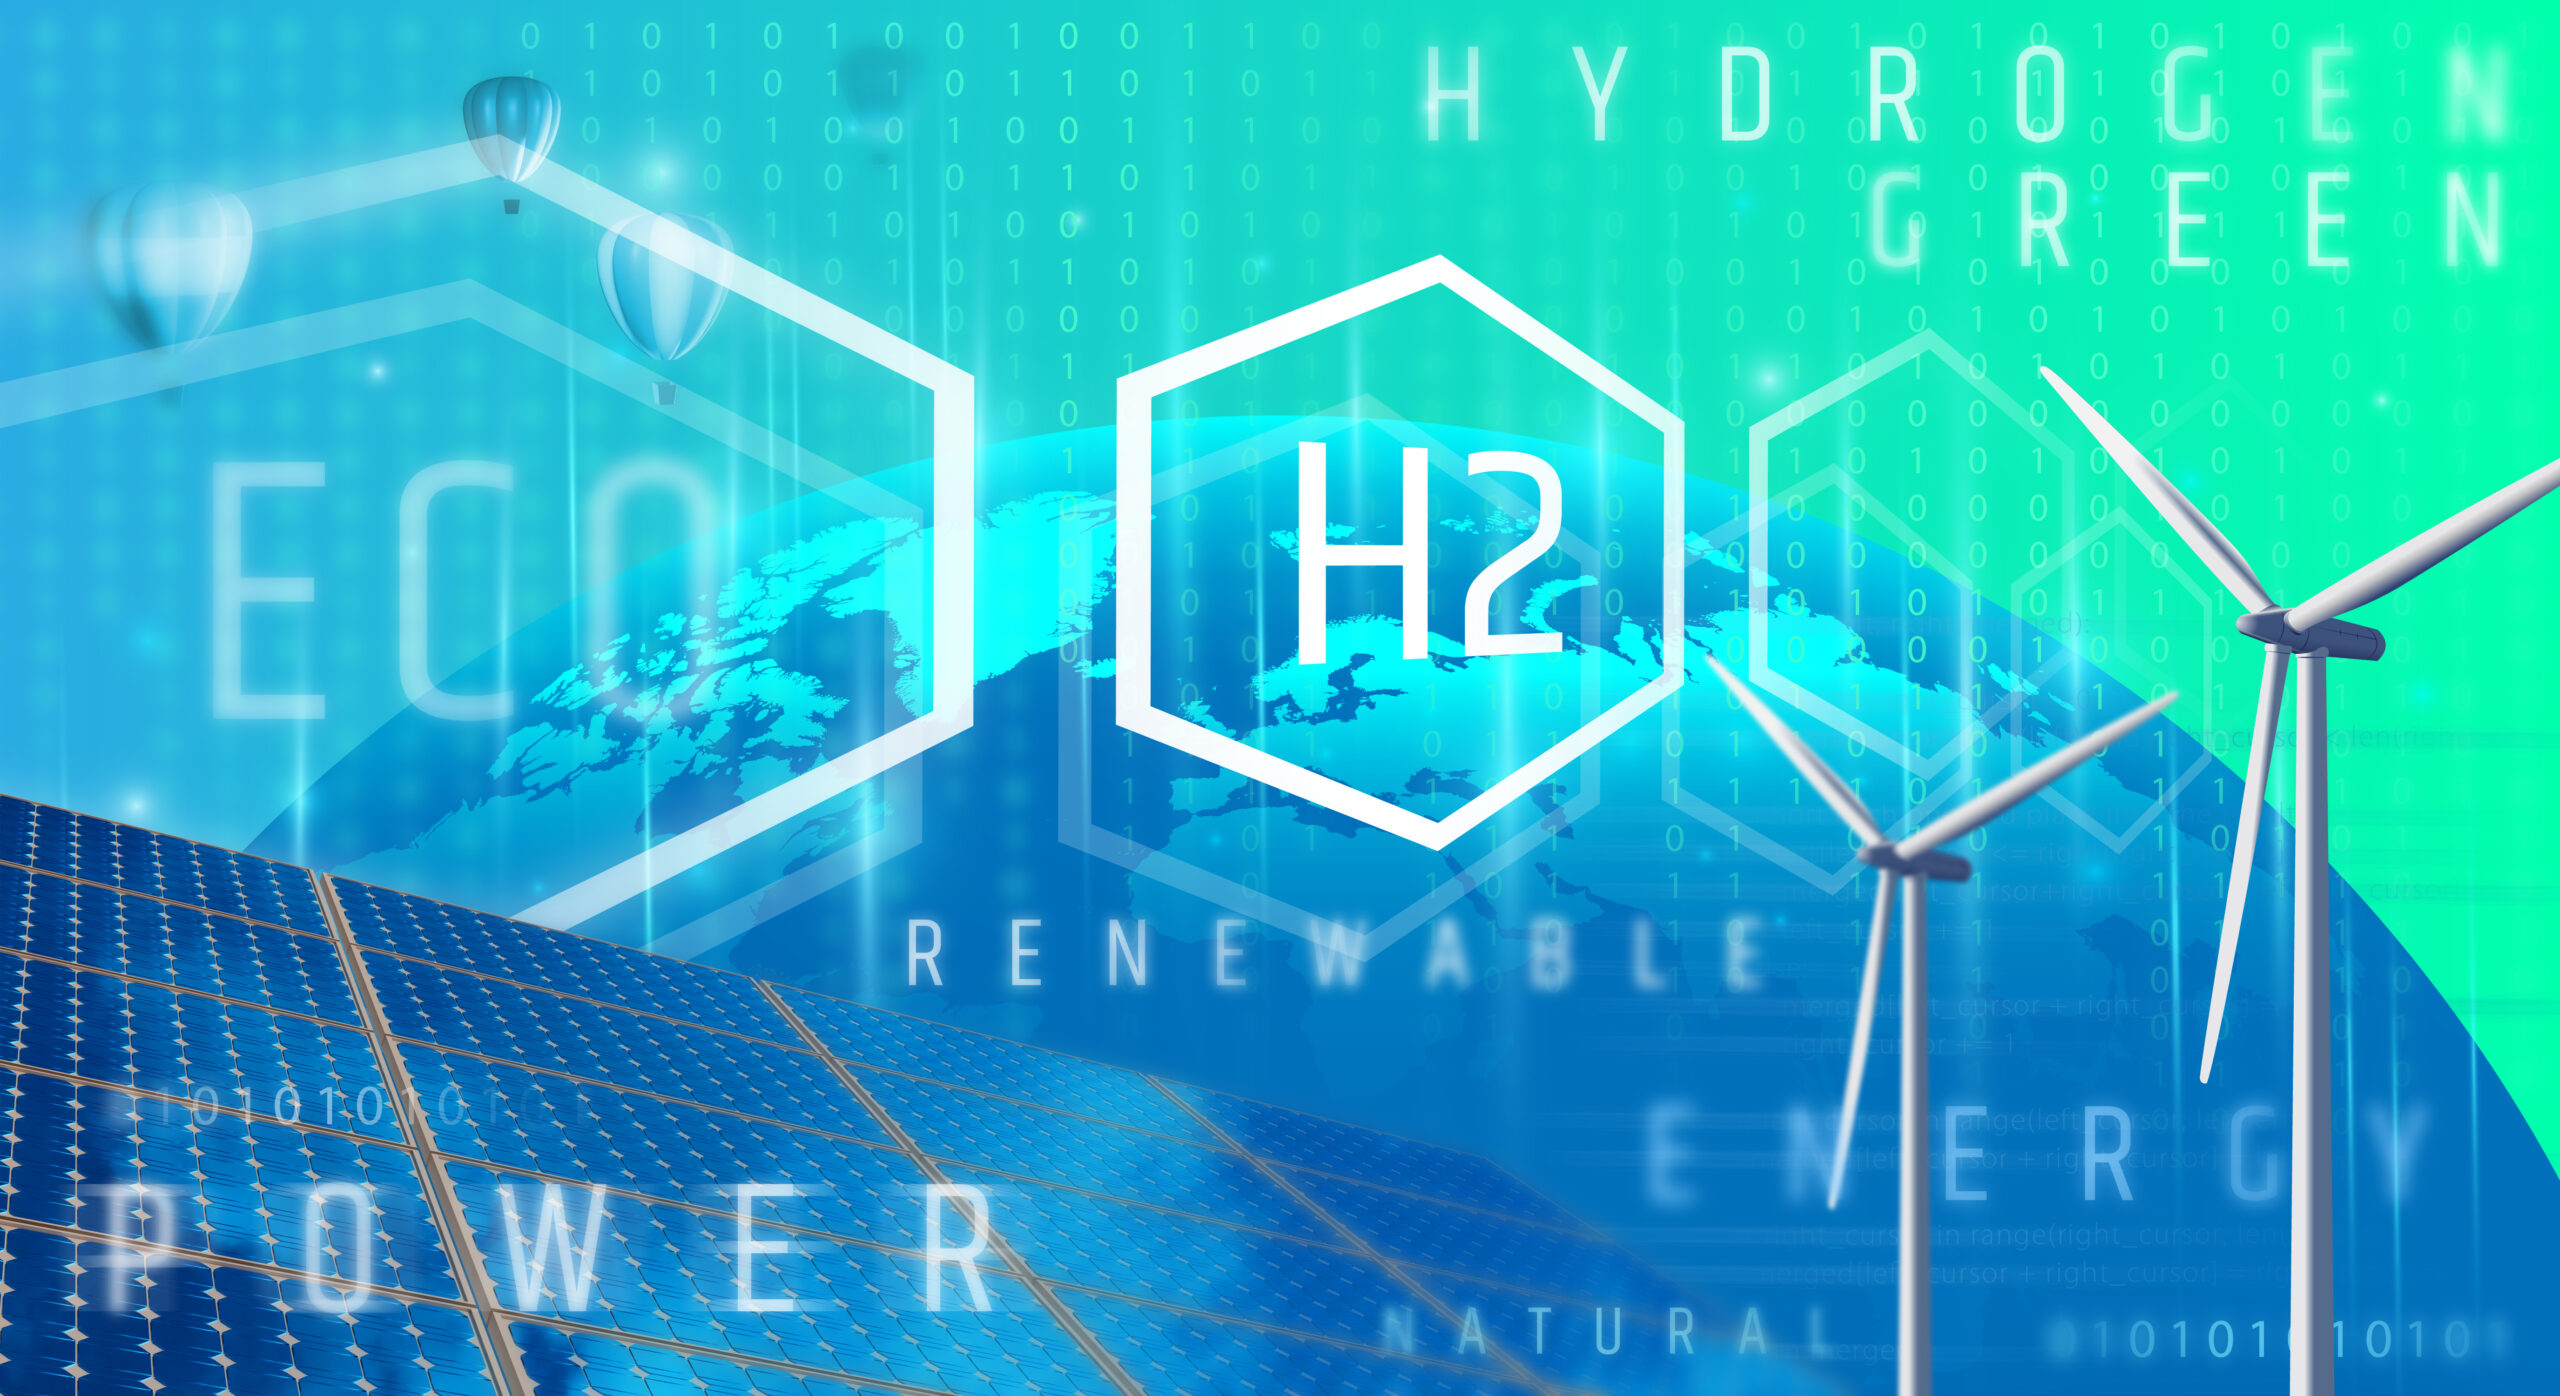 Green Hydrogen in a Circular Carbon Economy: Opportunities and Limits